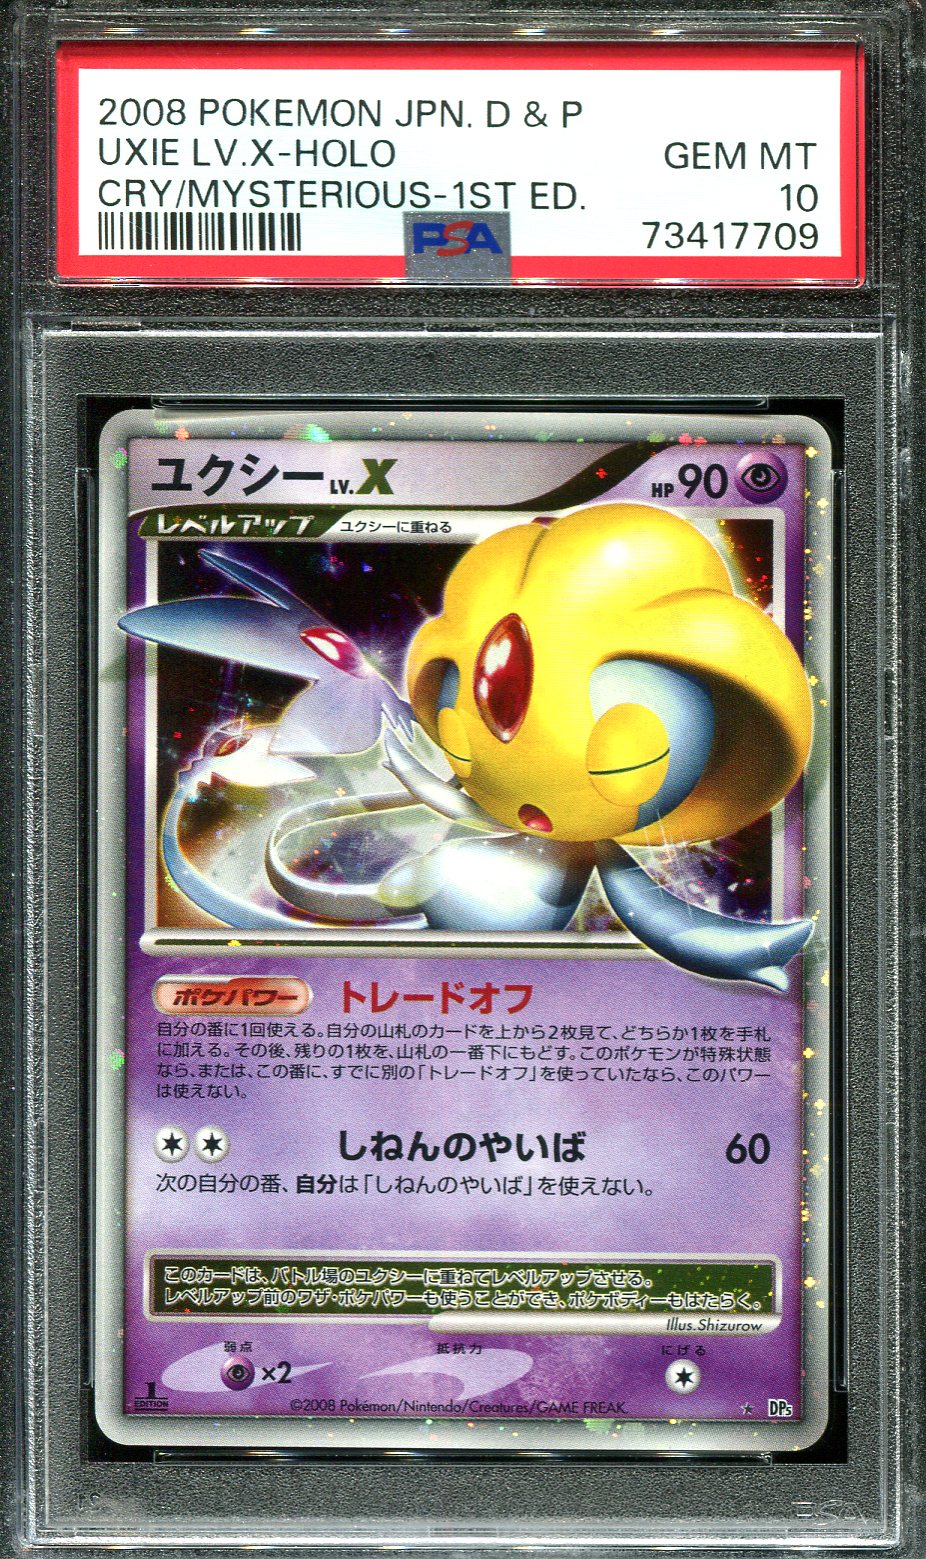 UXIE LV X PSA 10 POKEMON CRY OF THE MYSTERIOUS DP5 JAPANESE HOLO RARE